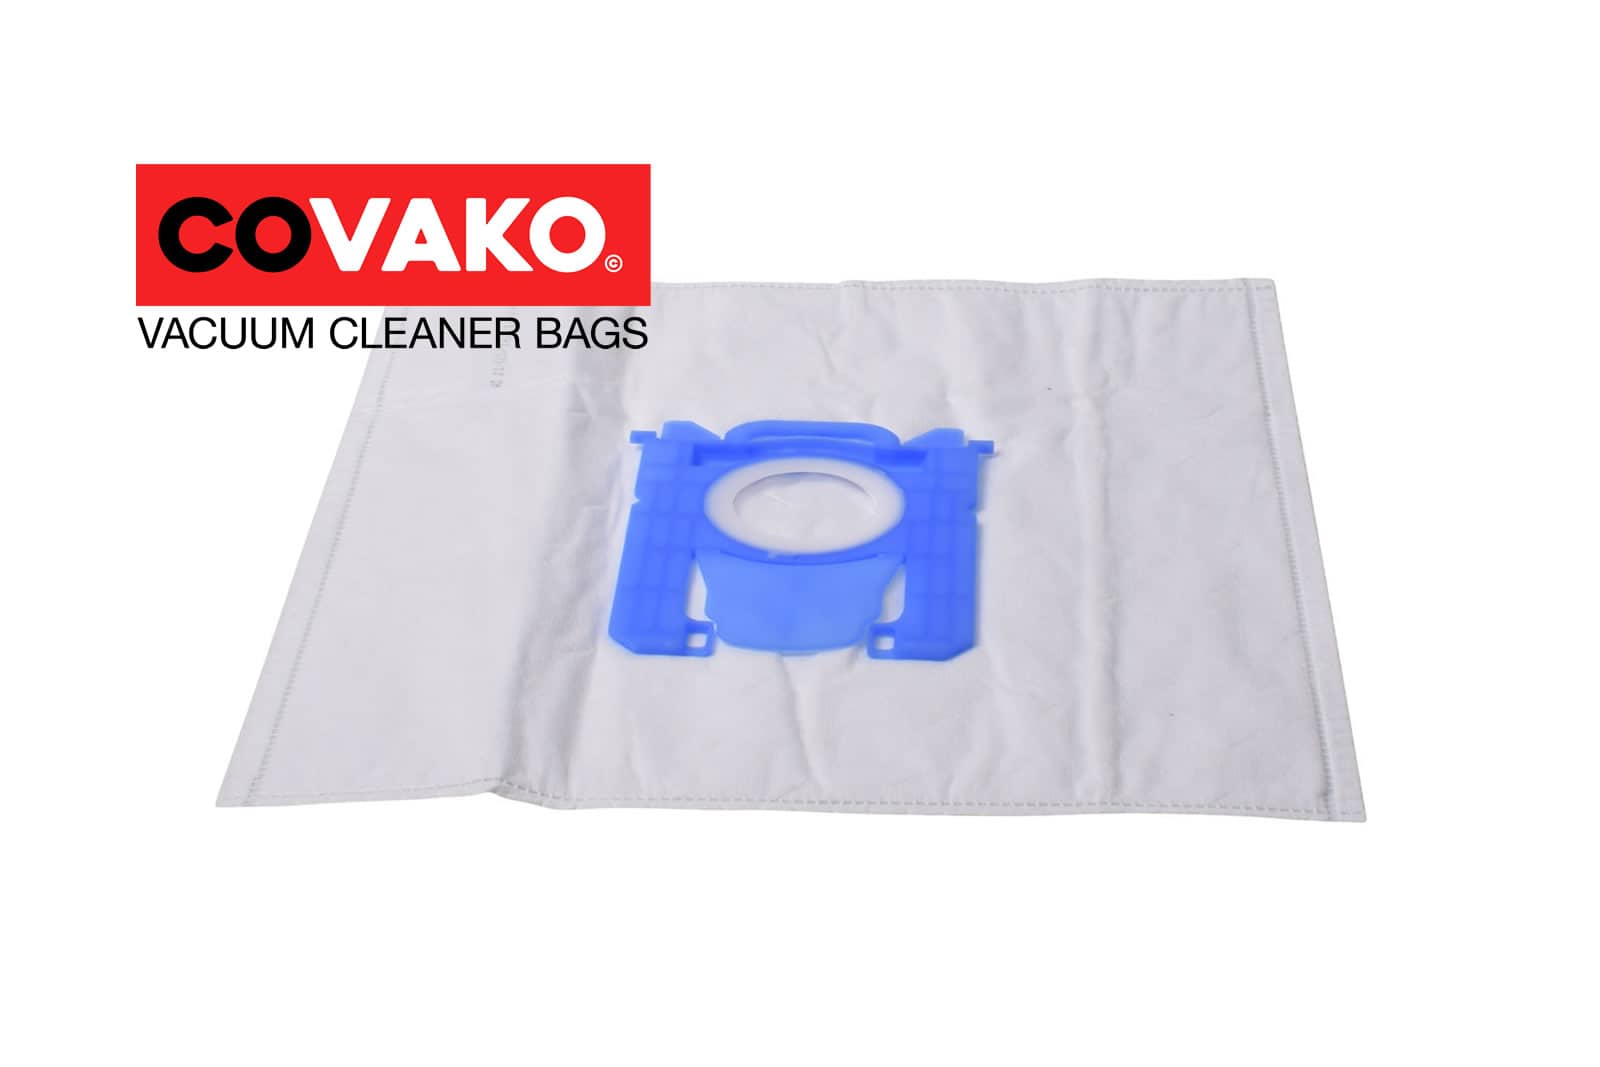 Electrolux AJG 6800…6899 Öko-Jet Maxx / Synthesis - Electrolux vacuum cleaner bags